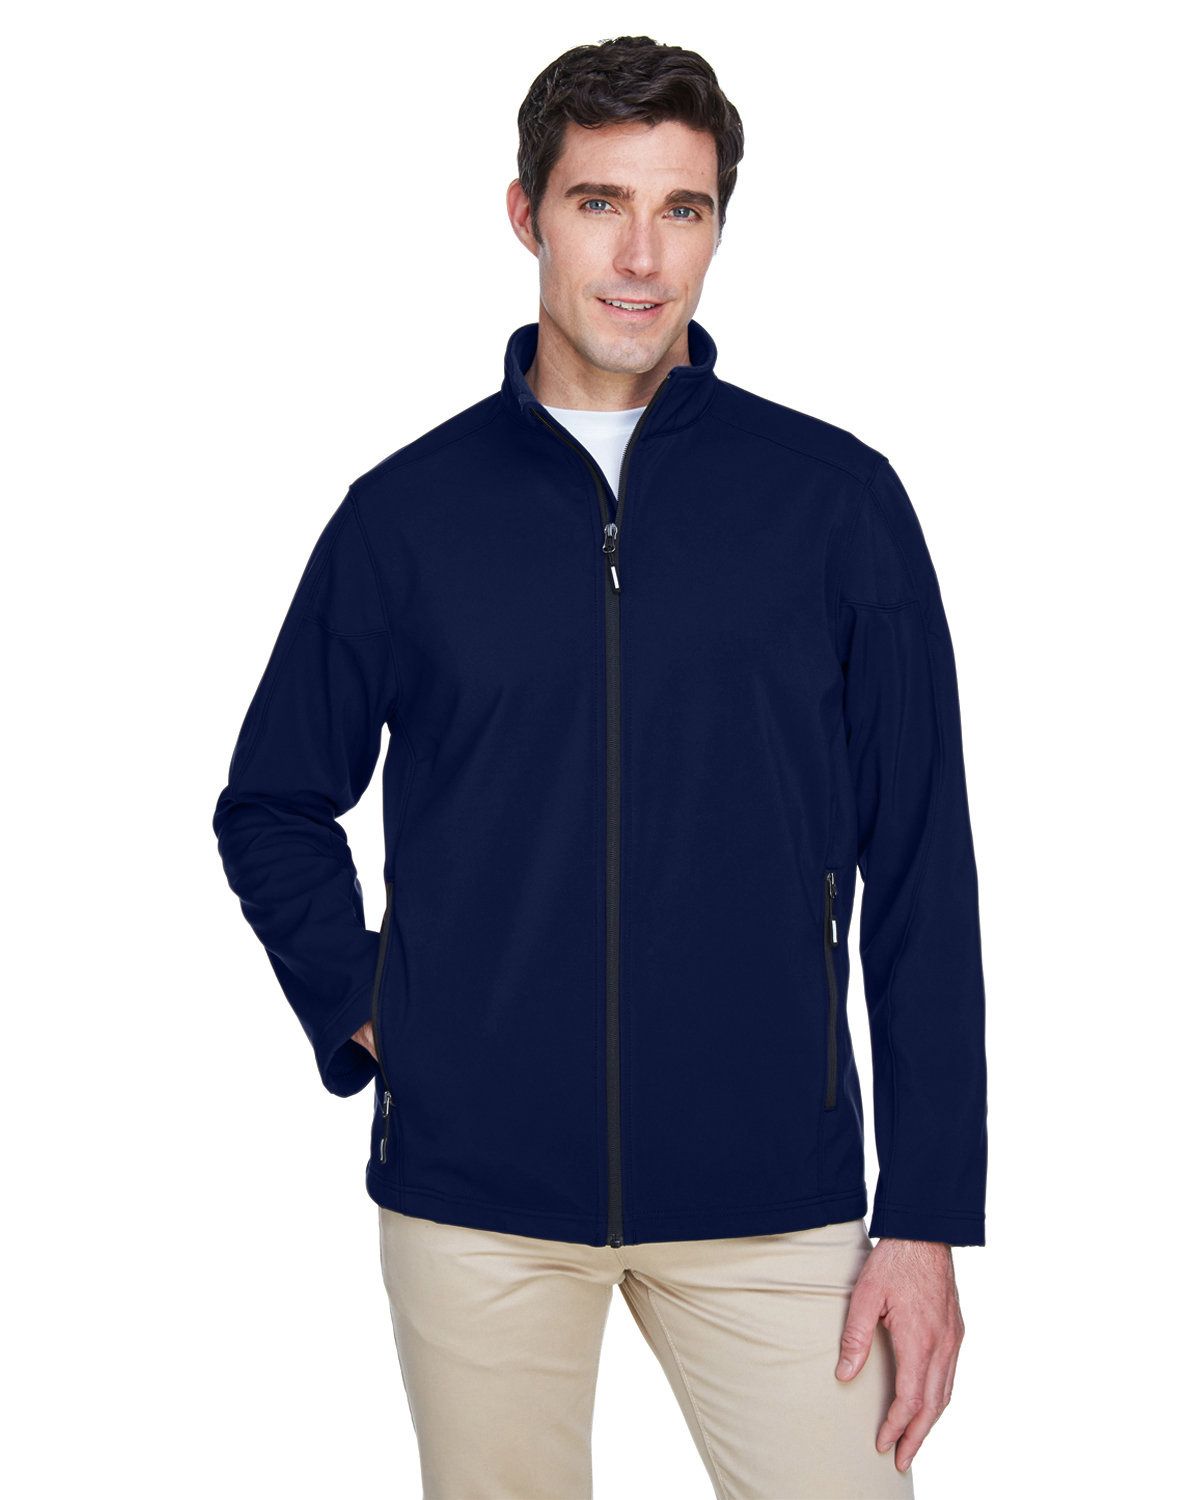 Core 365 Men's Tall Cruise Two-Layer Fleece Bonded Soft Shell Jacket CLASSIC NAVY 